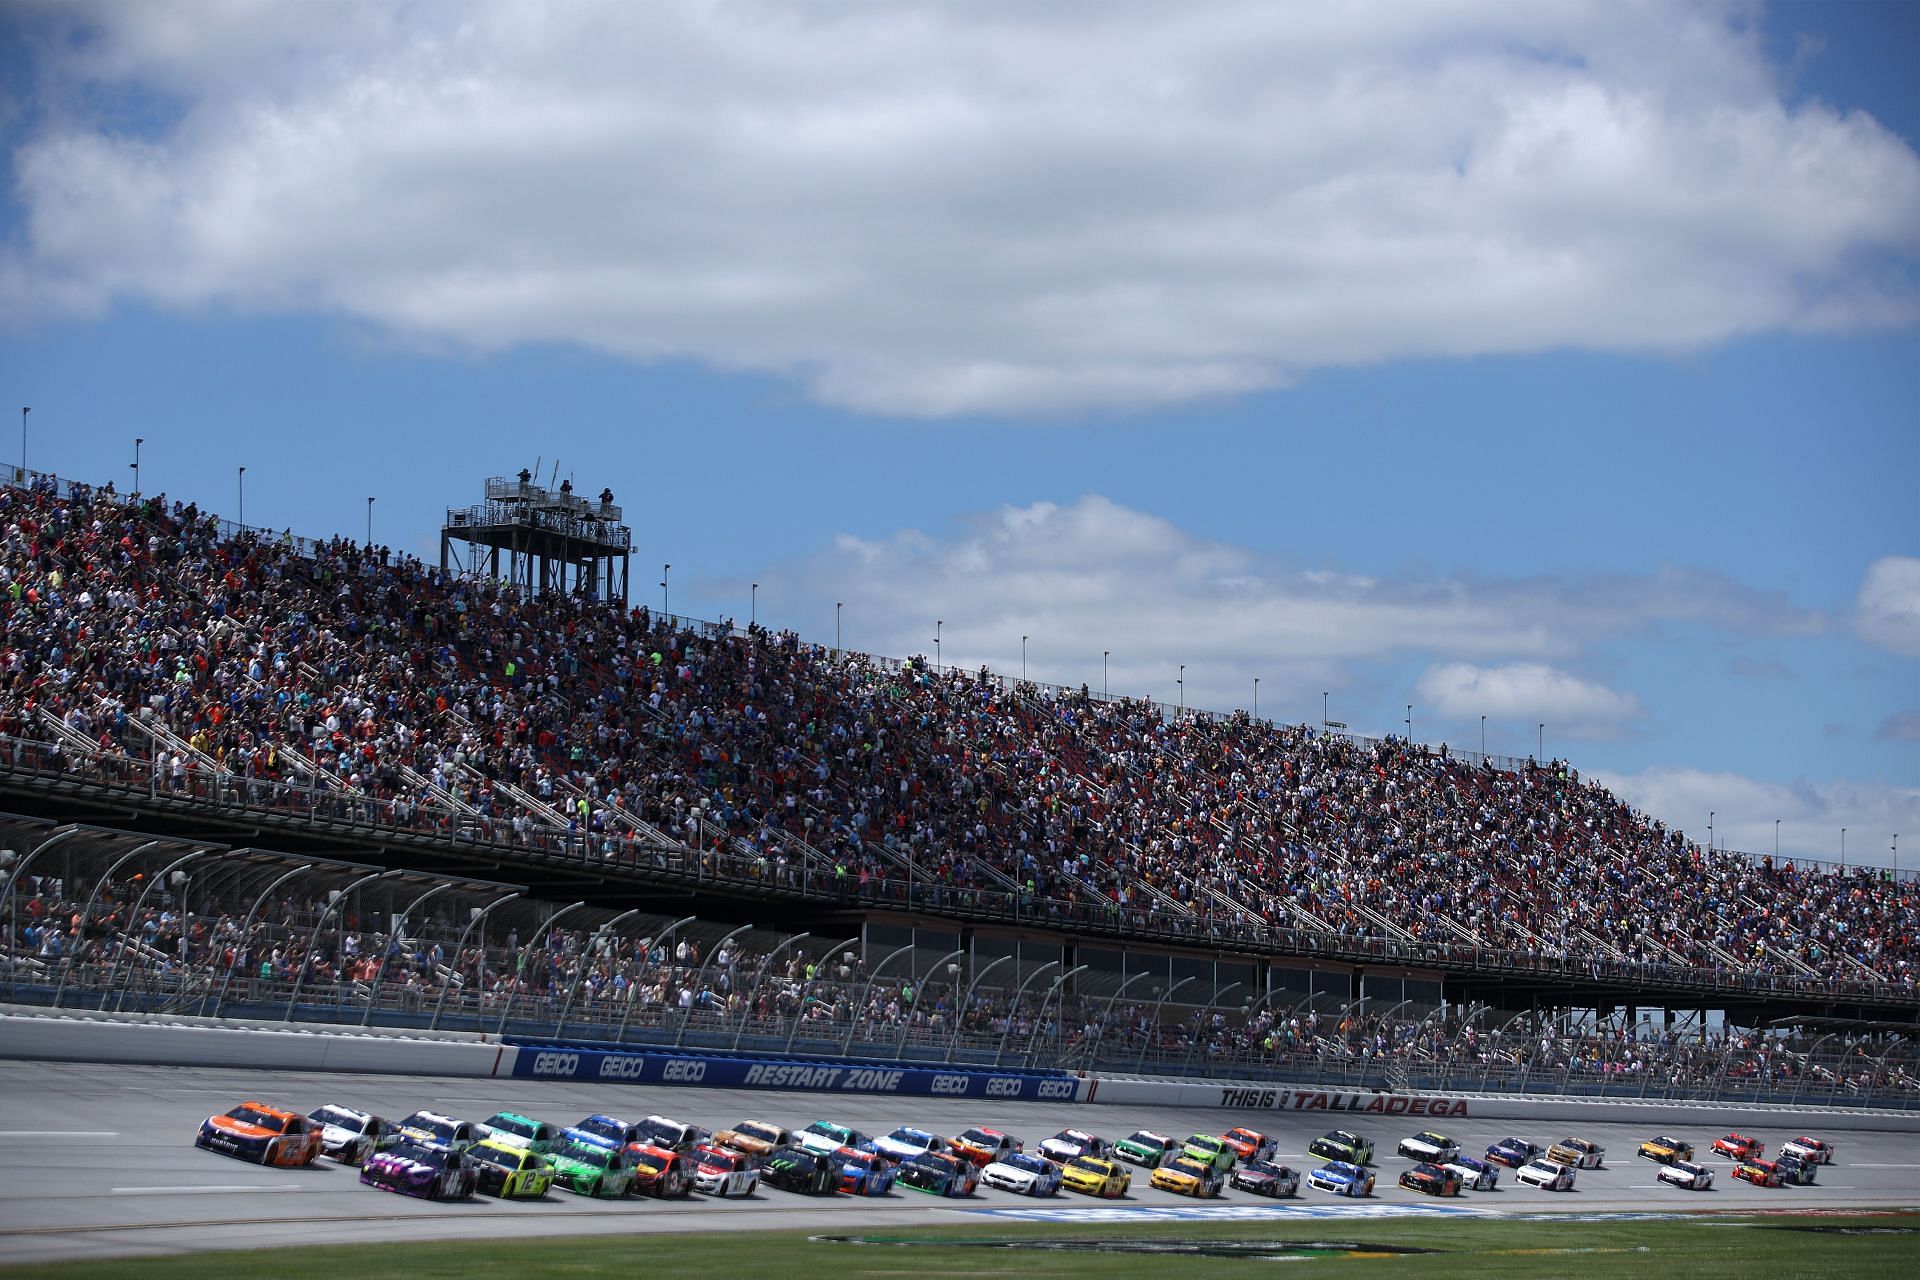 A general view of cars on the track during the Cup Series GEICO 500 at Talladega Superspeedway (Photo by Sean Gardner/Getty Images)